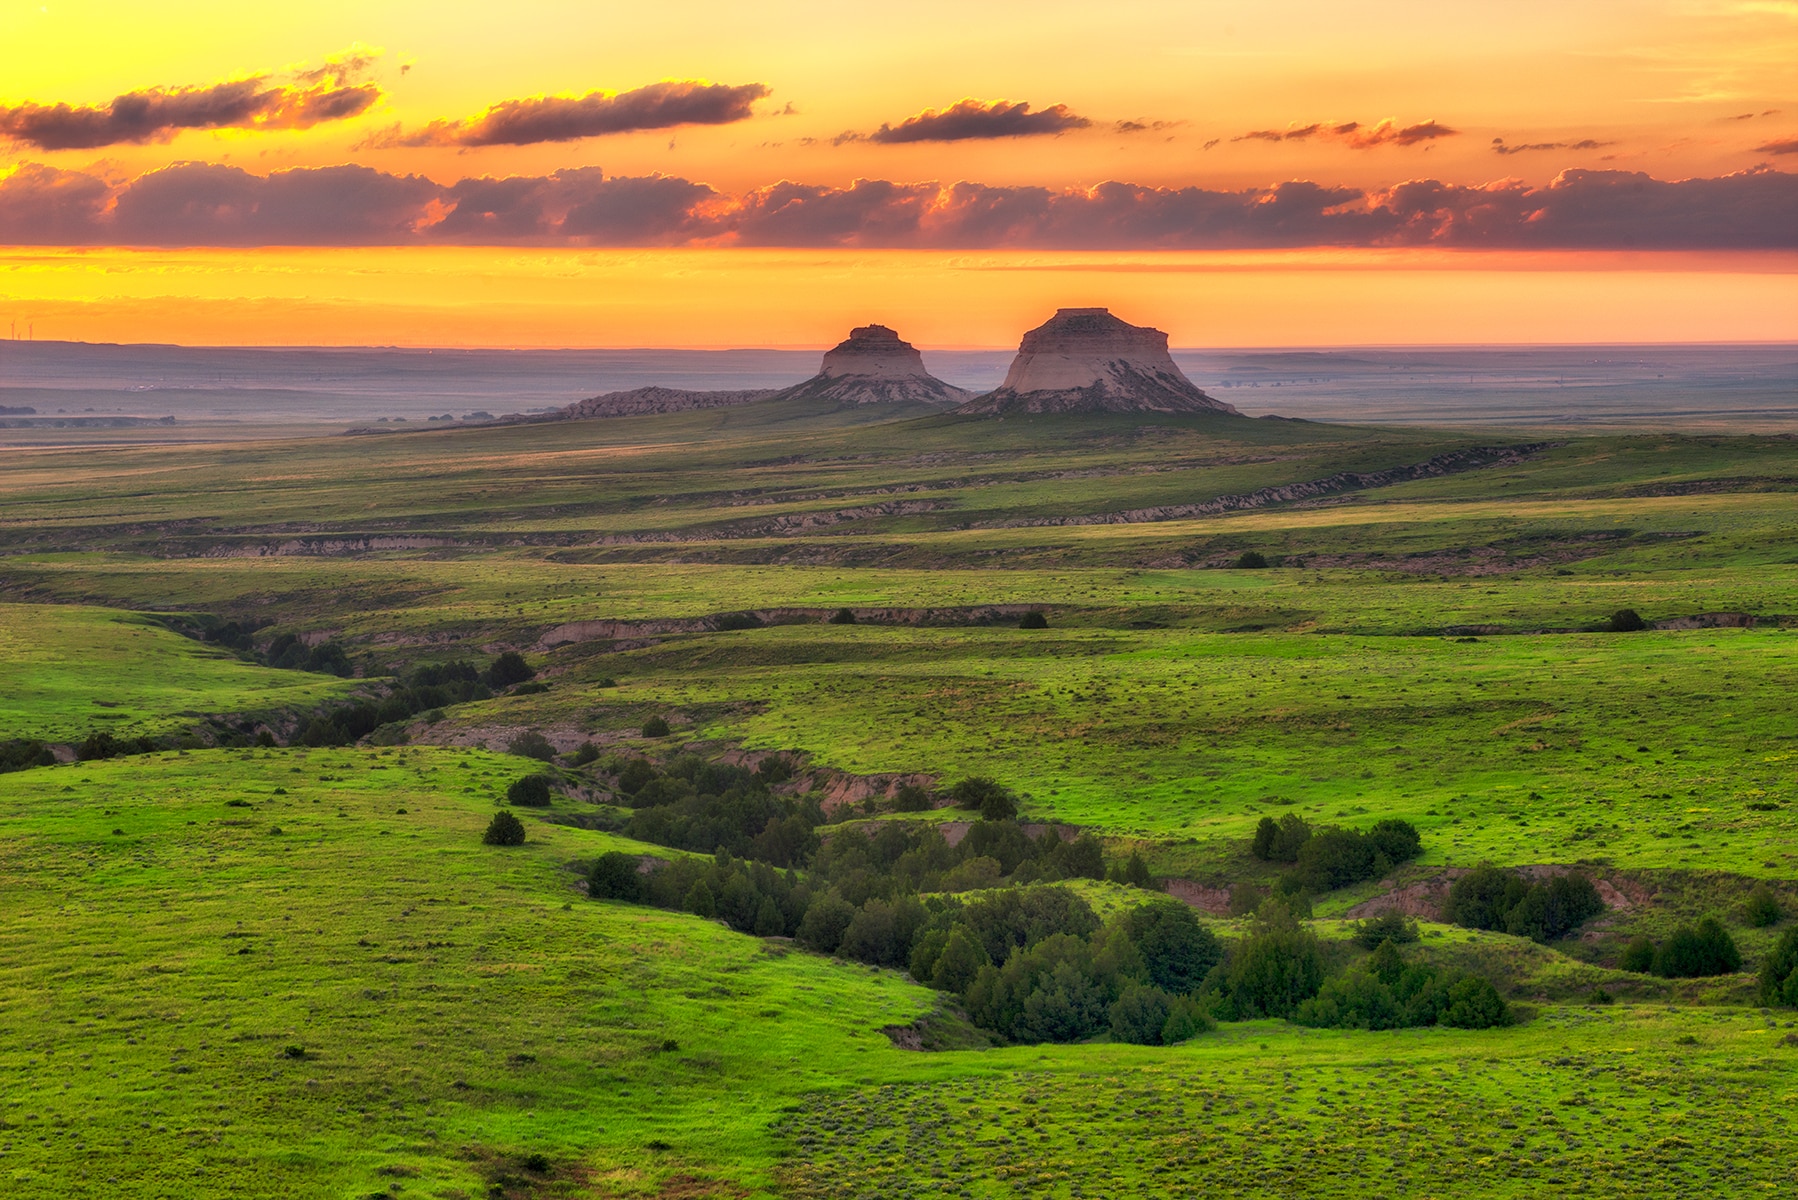 Spring comes happily to the Pawnee Buttes and the grasslands after good winter snows feed the soil.